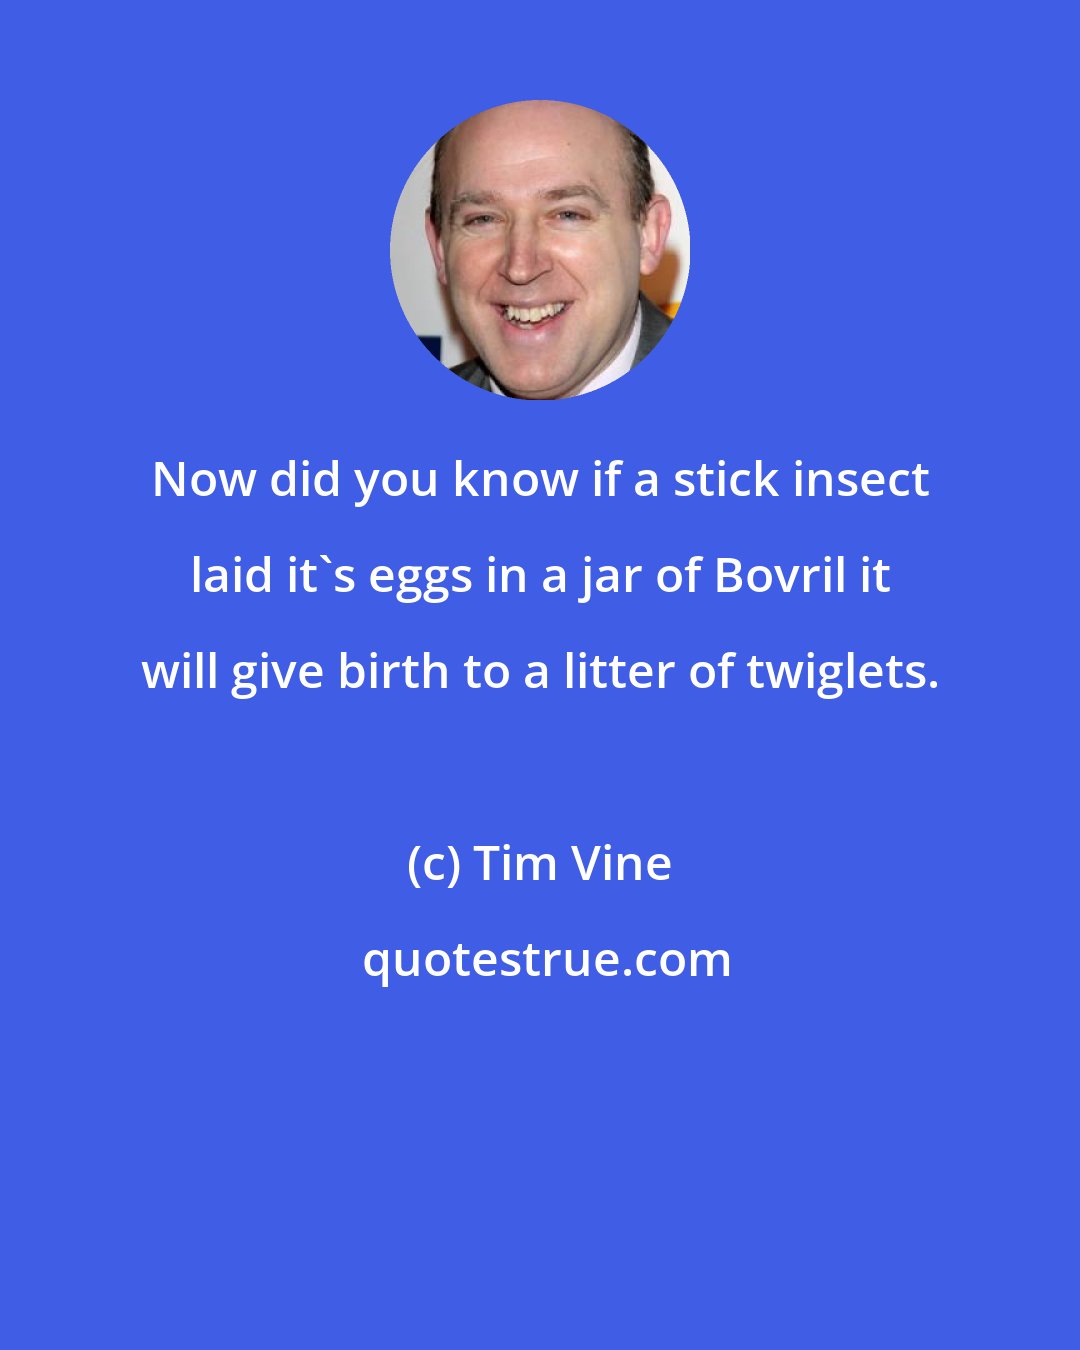 Tim Vine: Now did you know if a stick insect laid it's eggs in a jar of Bovril it will give birth to a litter of twiglets.